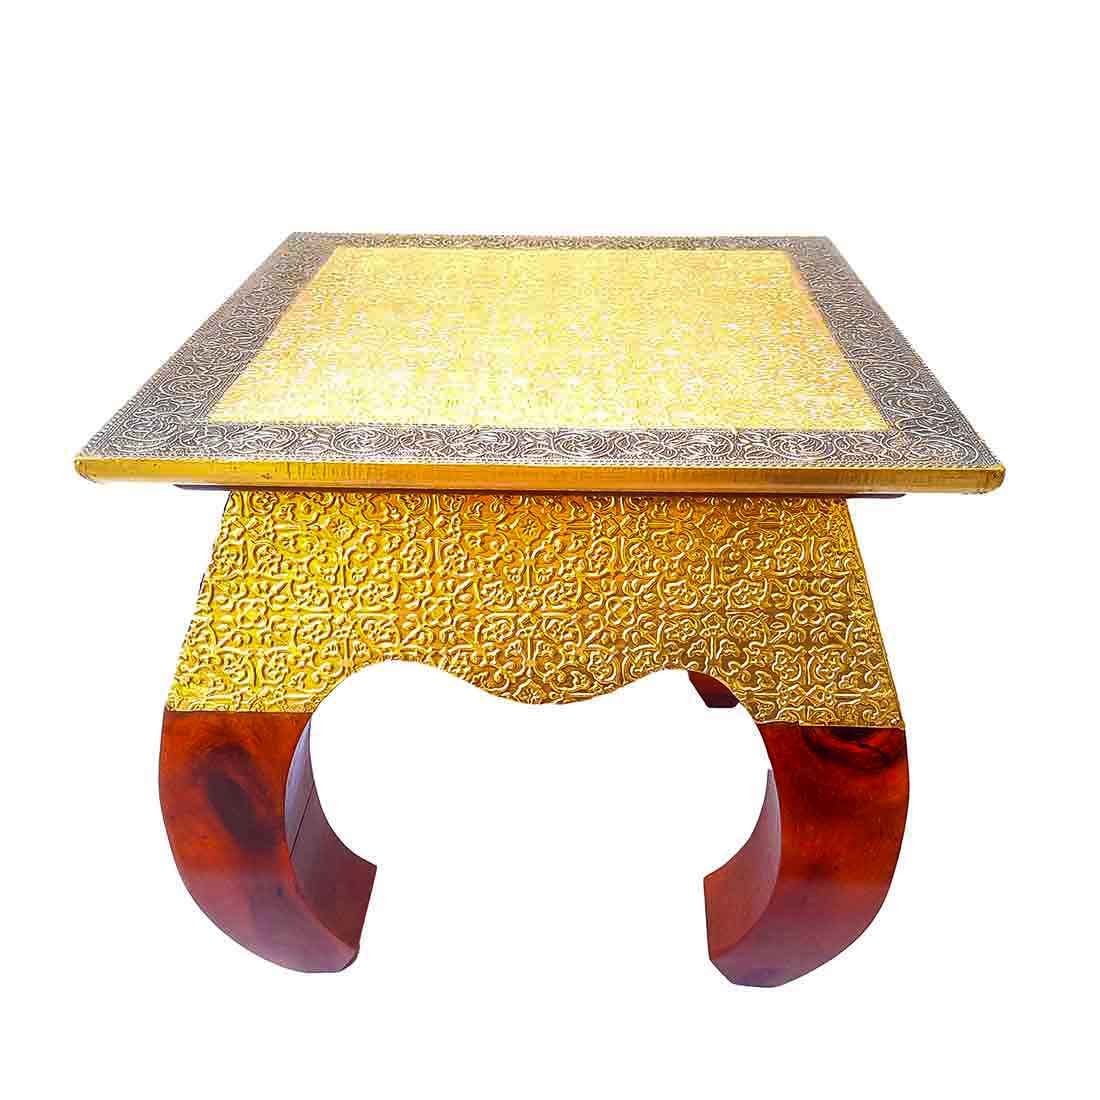 Brass Embellished | Wood Coffee Table | End Tables for Living Room - 14 Inches - ApkaMart